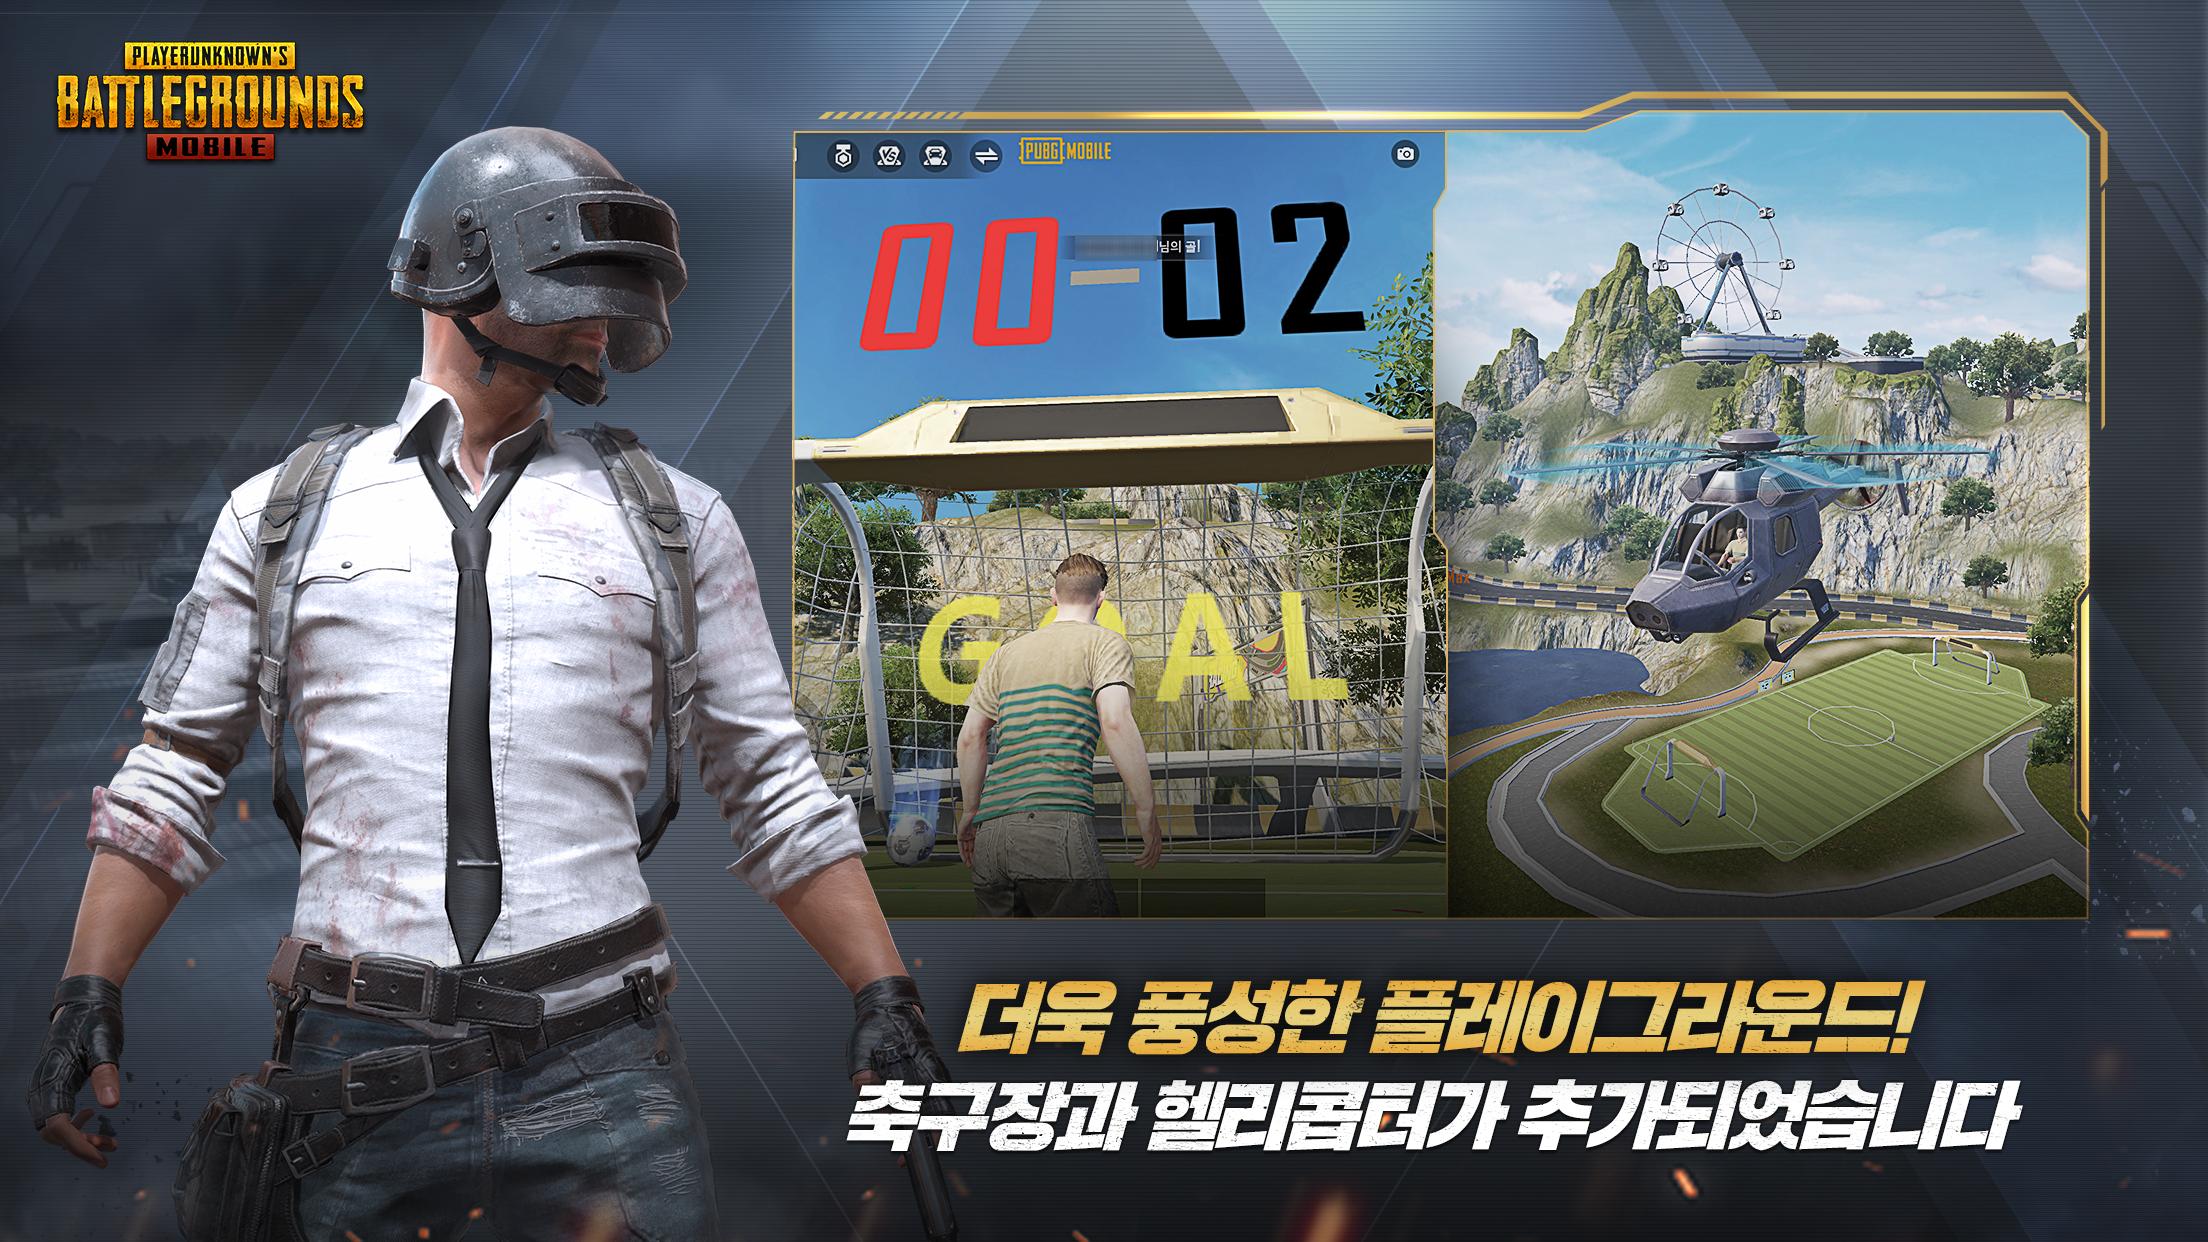 Download obb service is running pubg фото 80